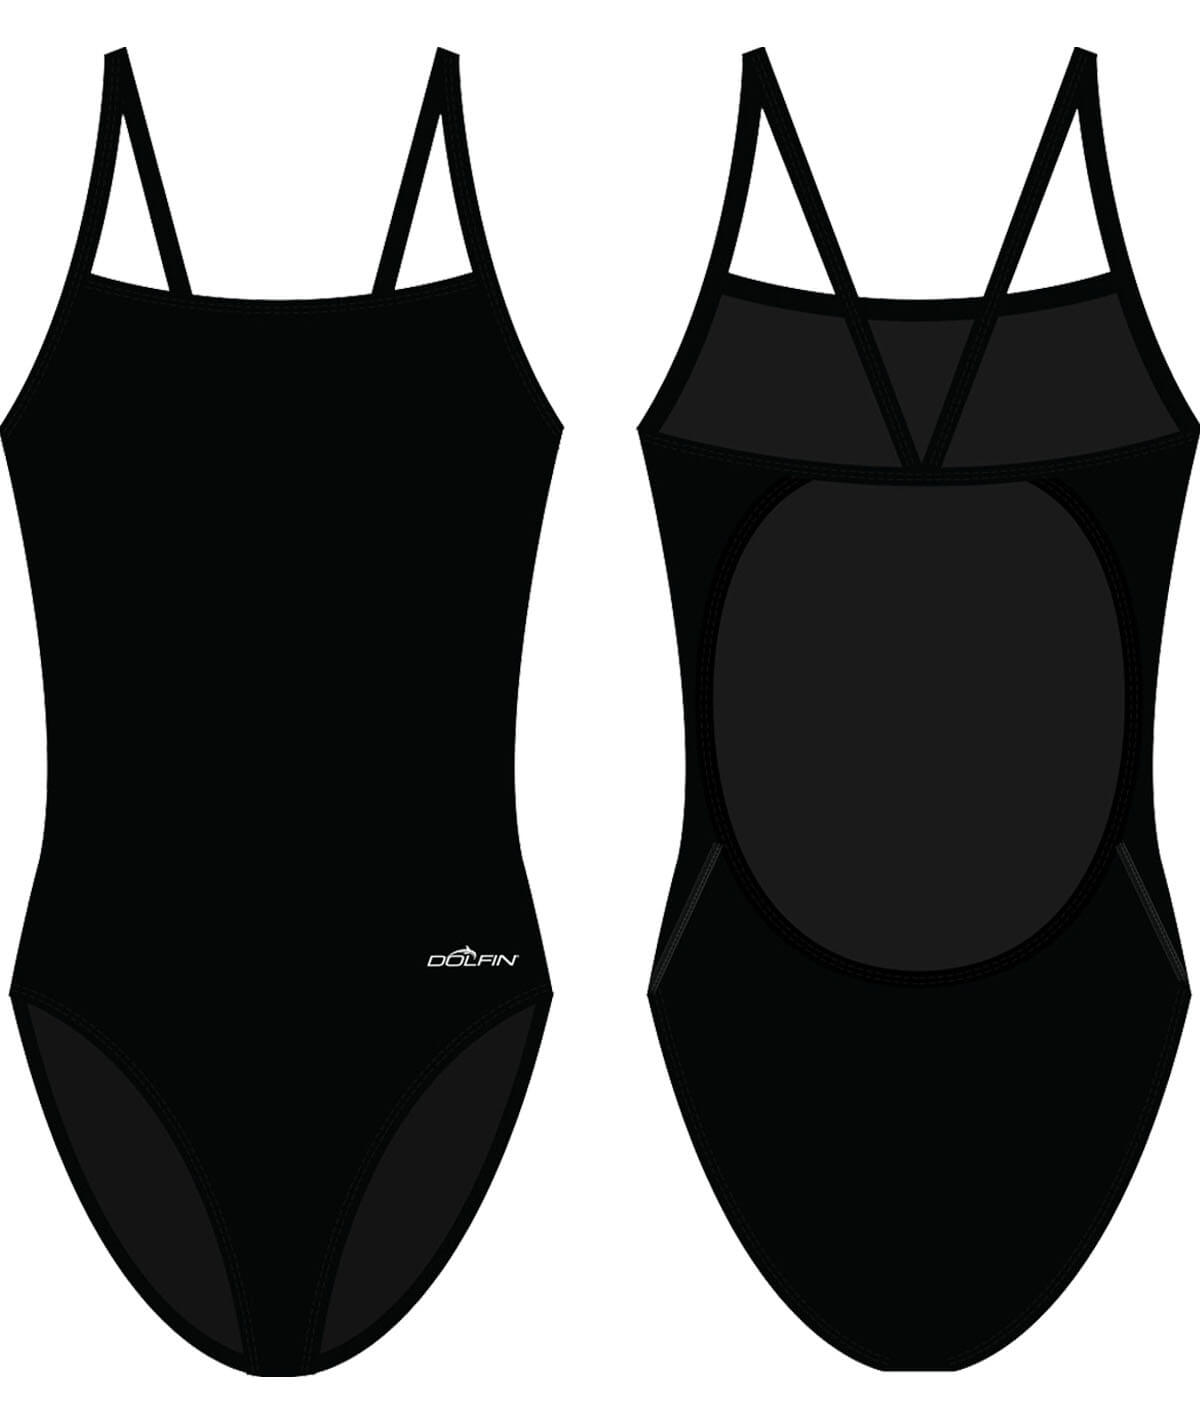 Fit Kit - Female Sublimated String Back One Piece